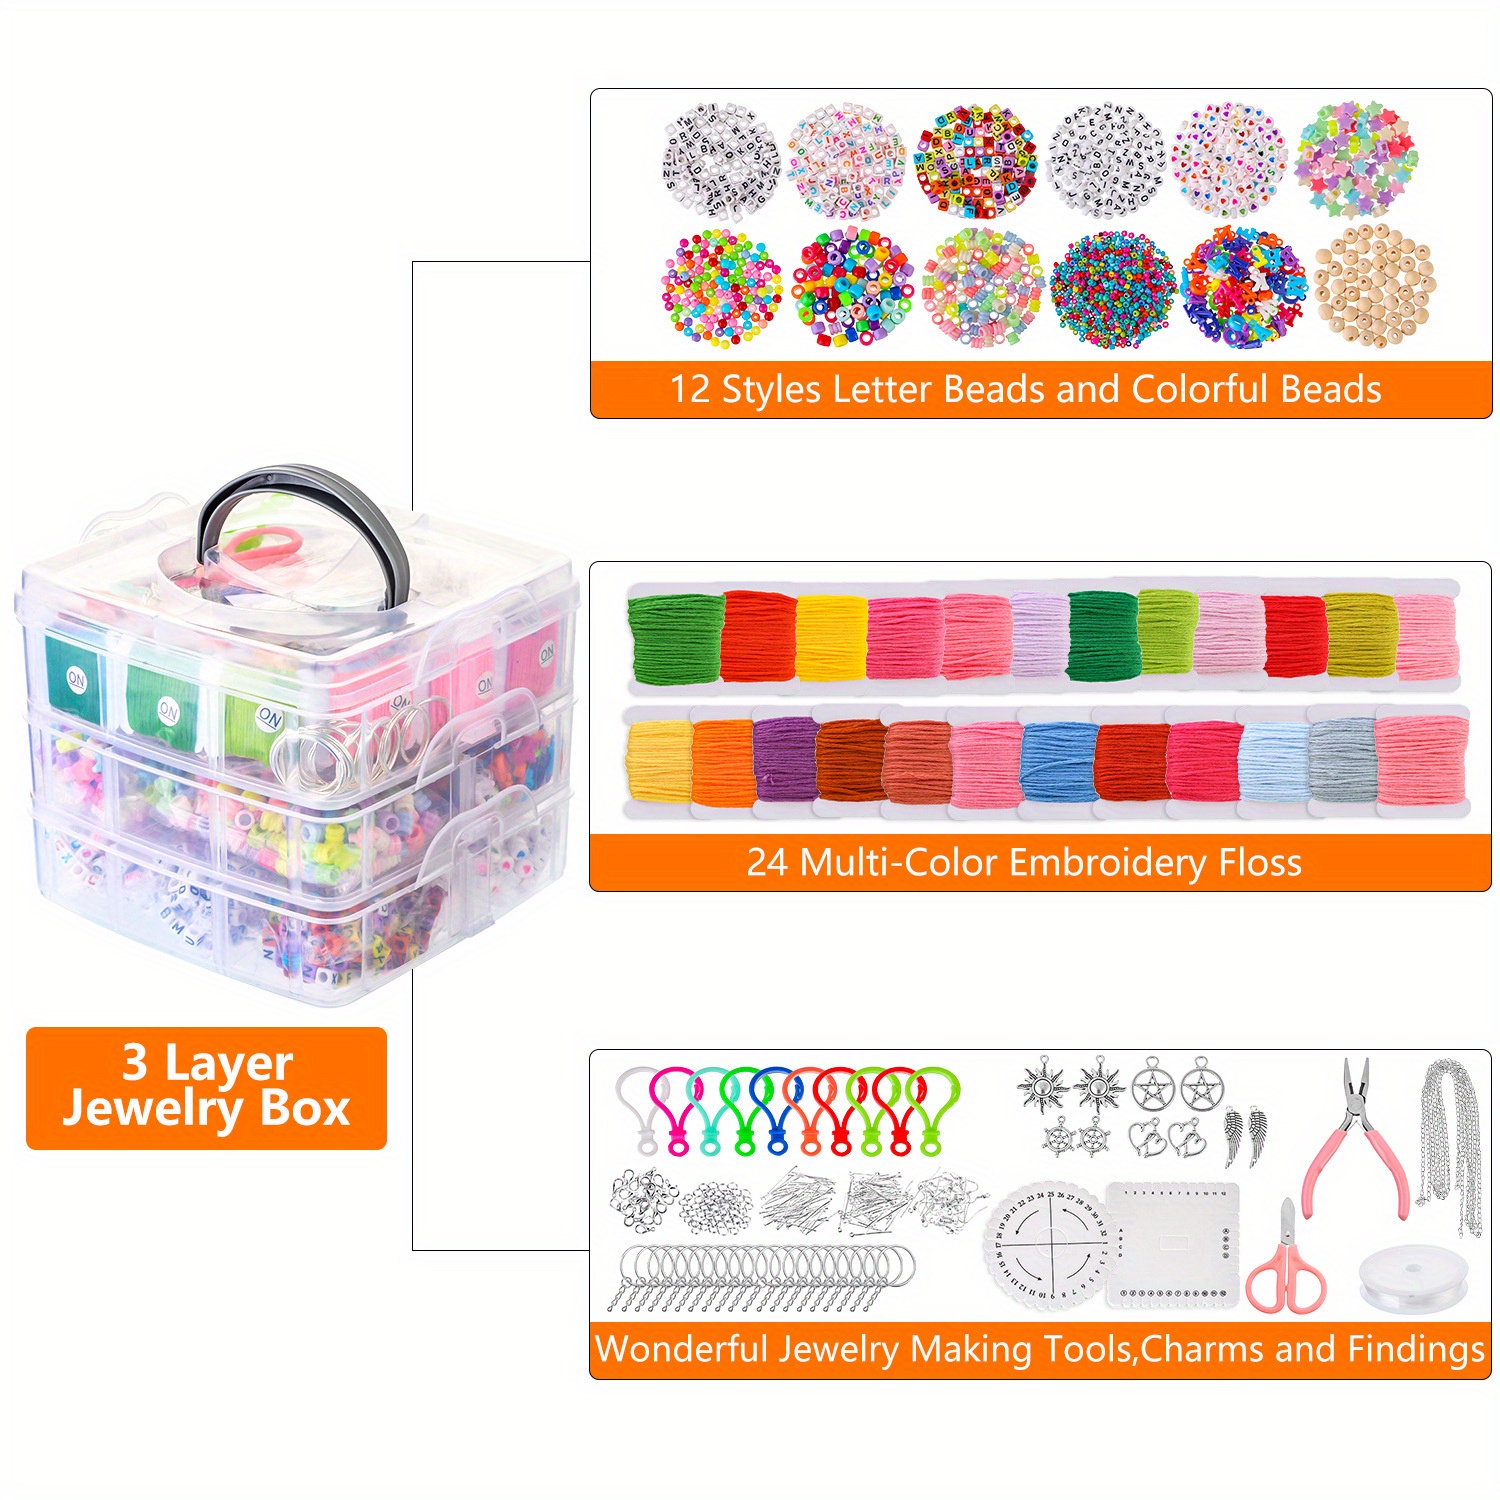  EXCEART 20 Pcs Jewlery Kit Bejeweled Kit Charm Pendant Diy  Pendant Charms Jewelry Alloy : Arts, Crafts & Sewing